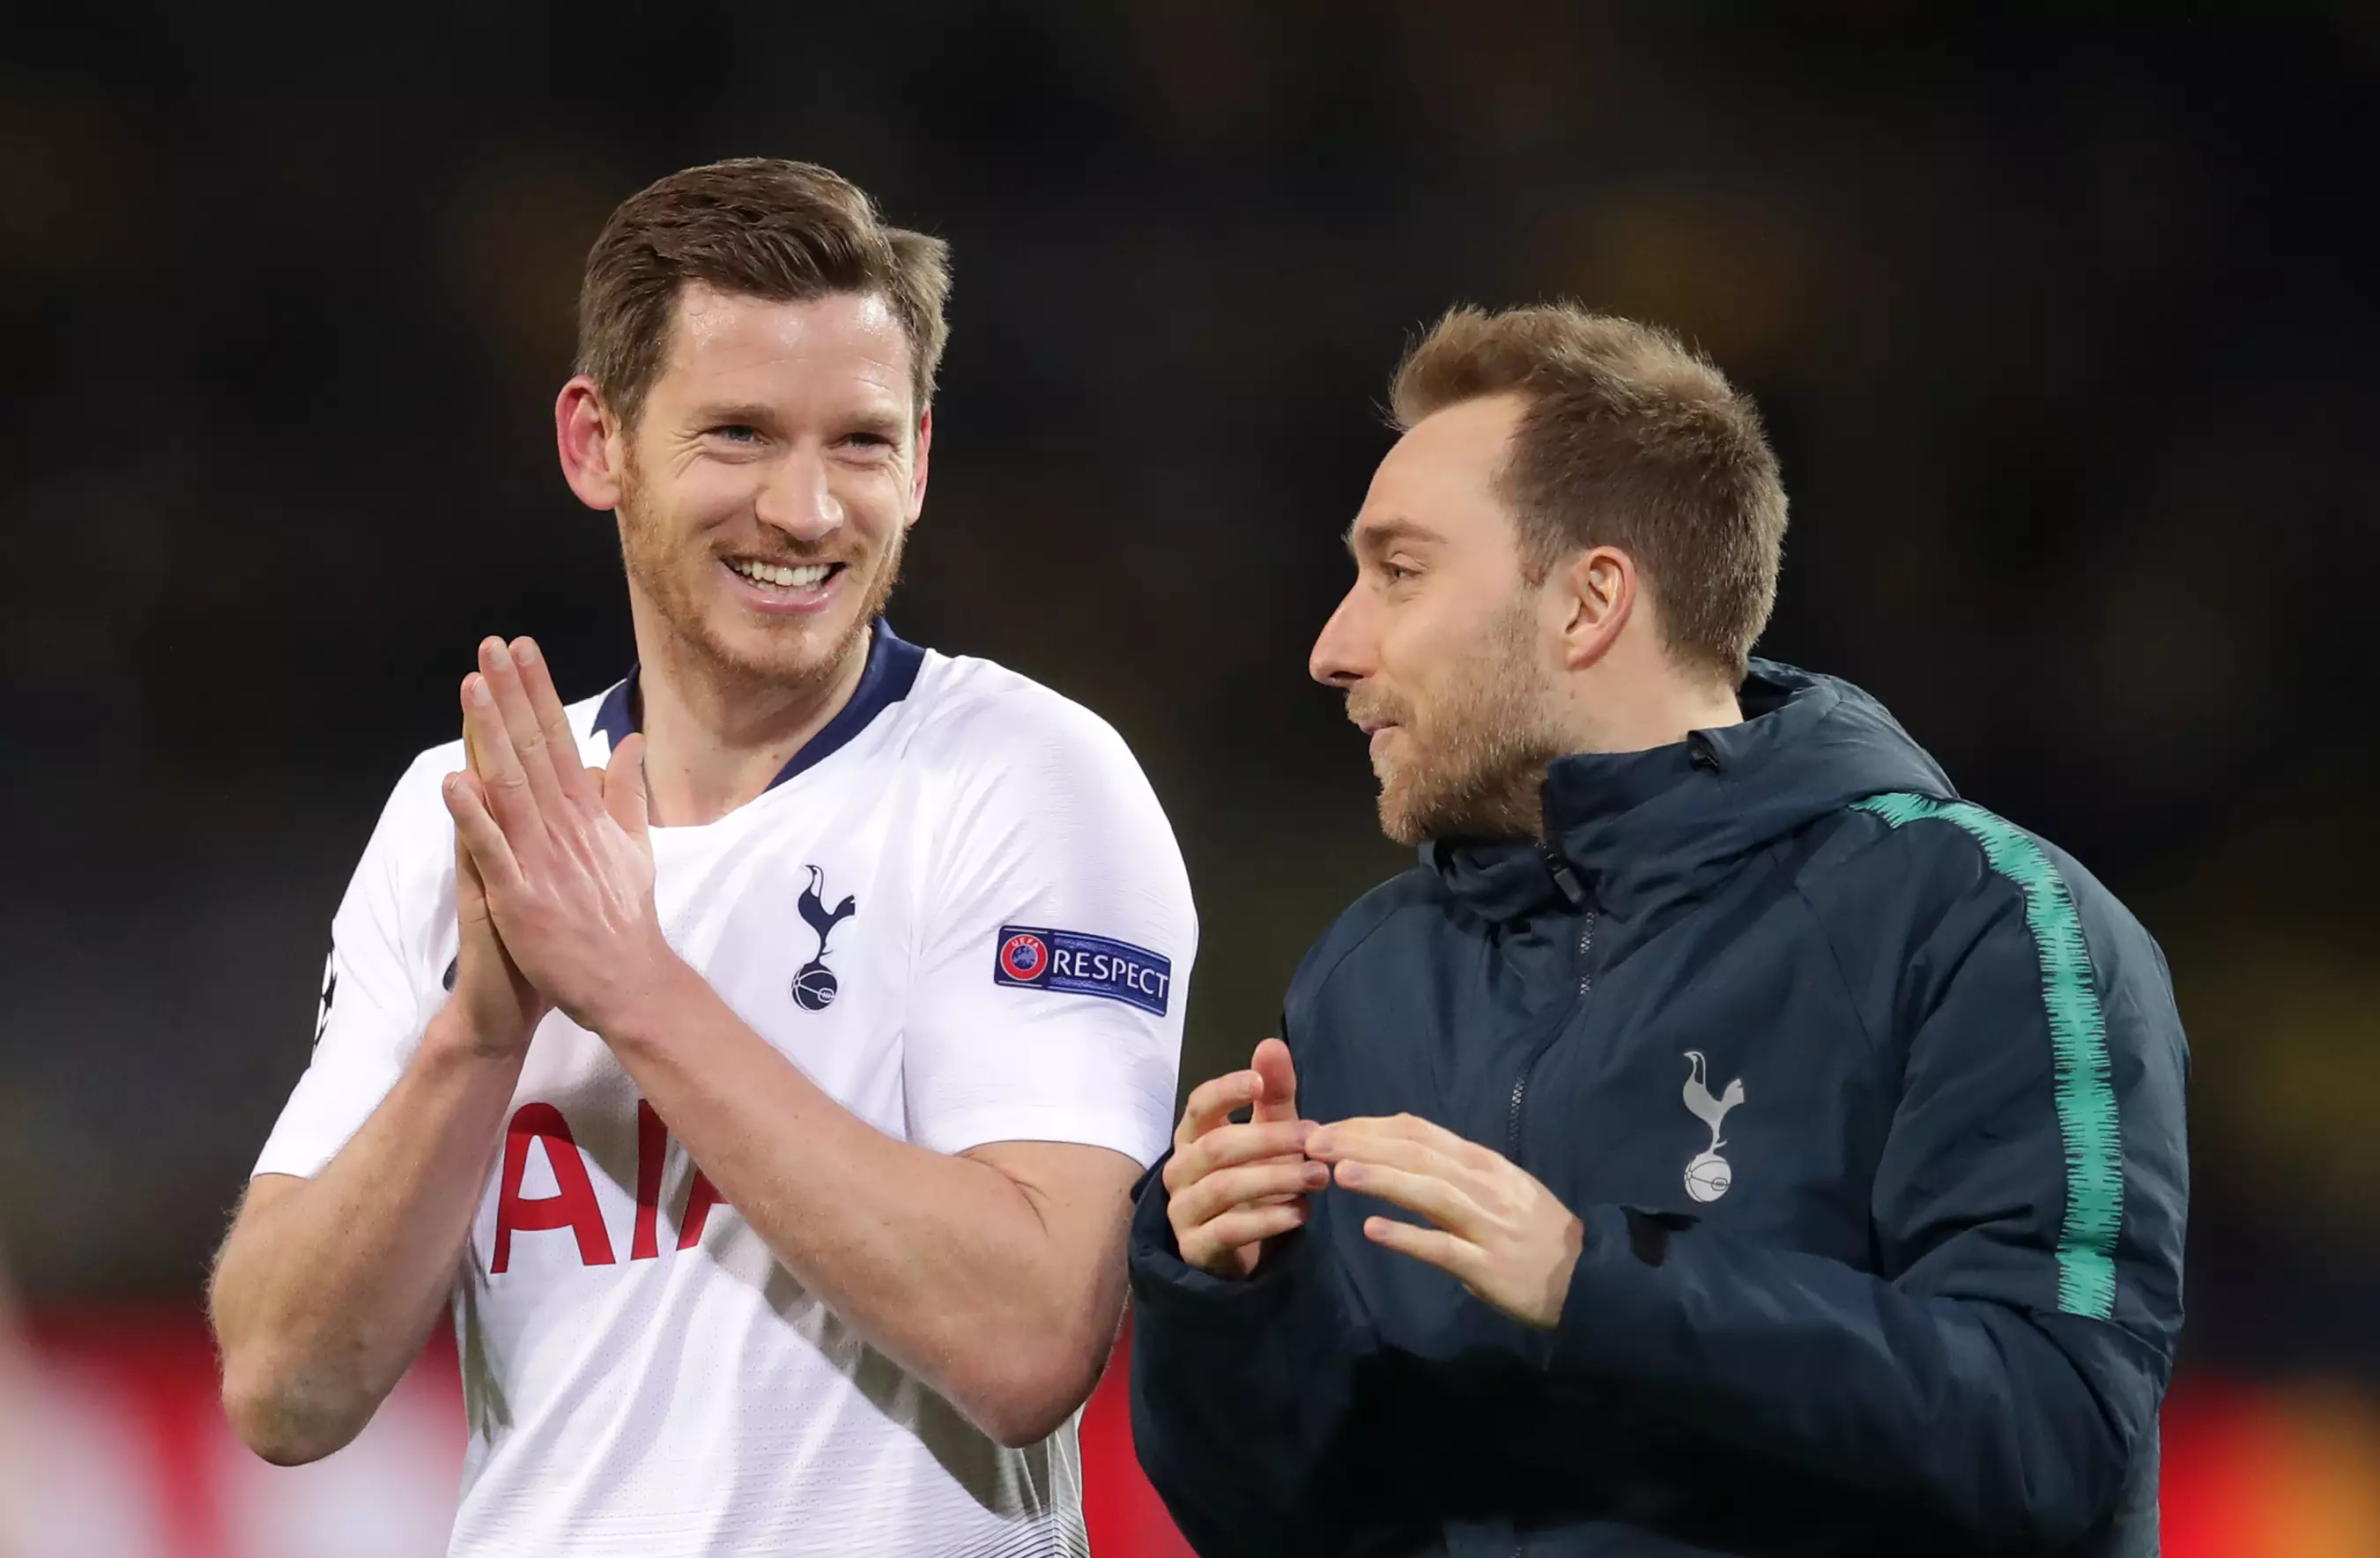 Vertonghen and Eriksen plot their exists from Spurs. Image: PA Images